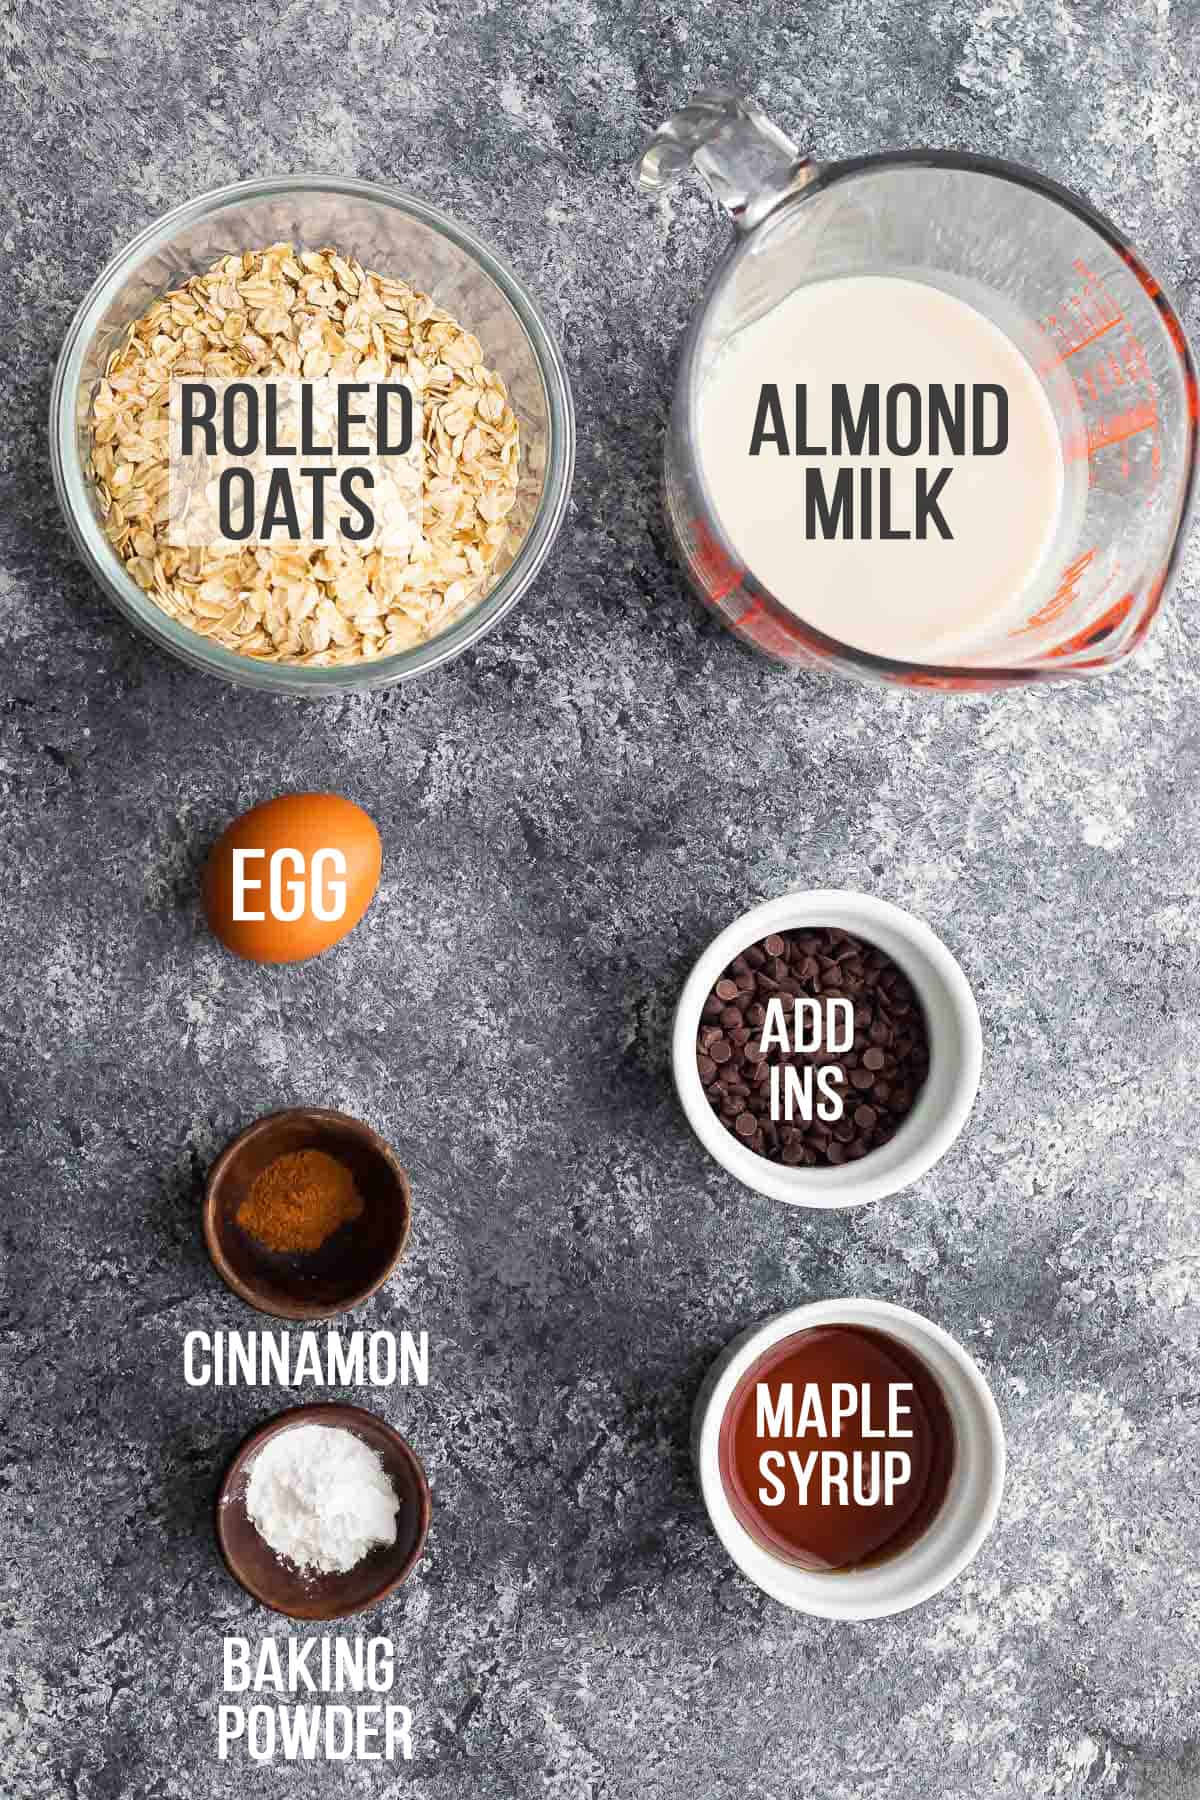 ingredients required to make baked oatmeal